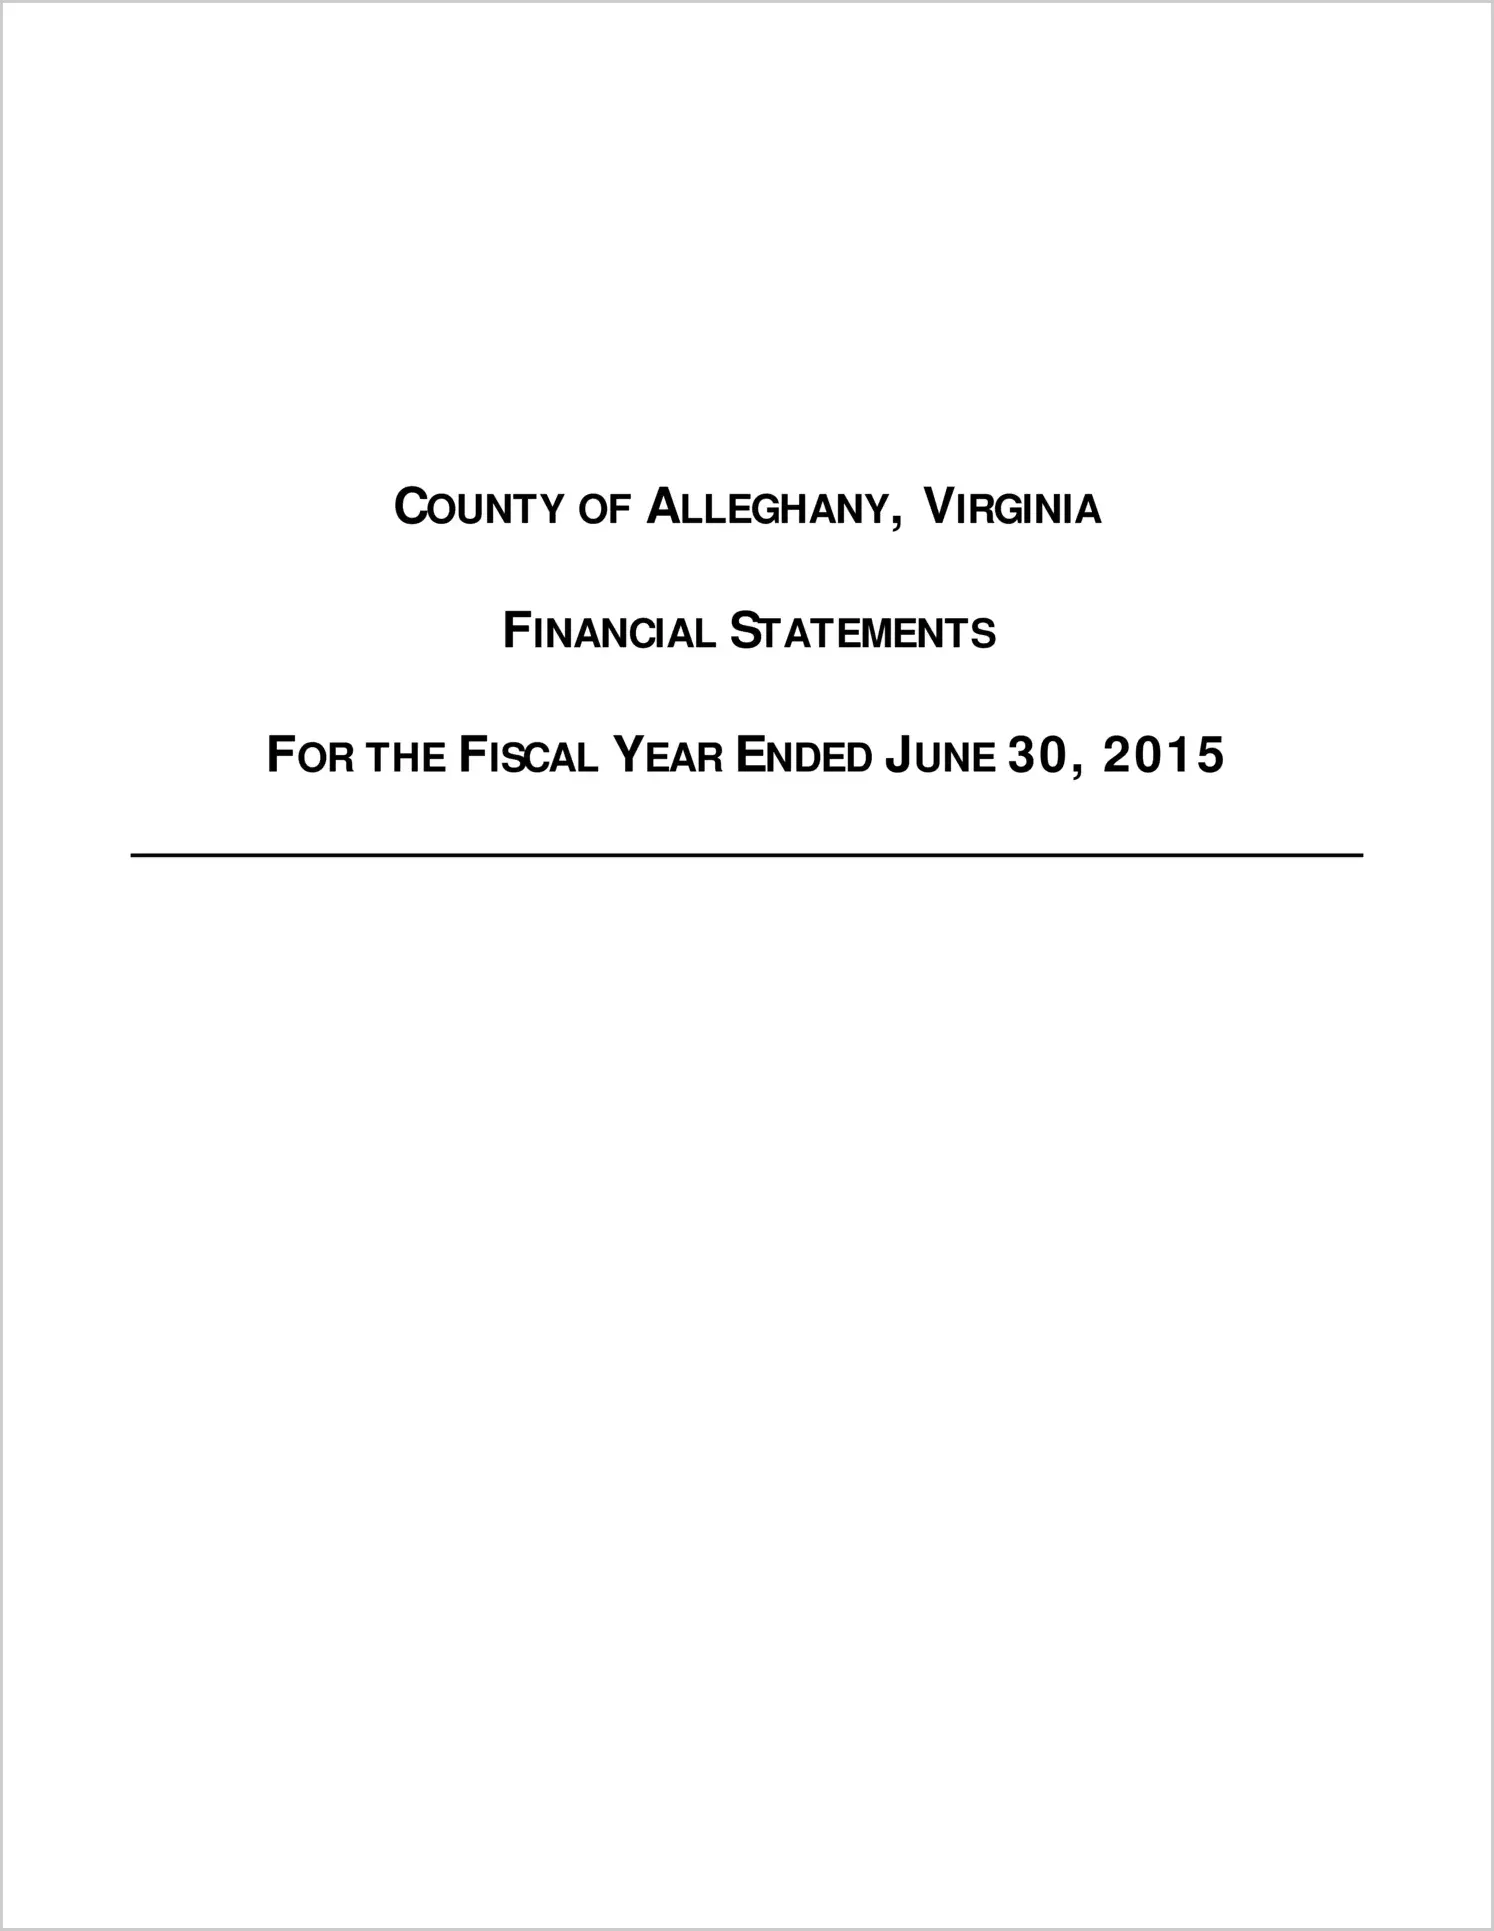 2015 Annual Financial Report for County of Alleghany